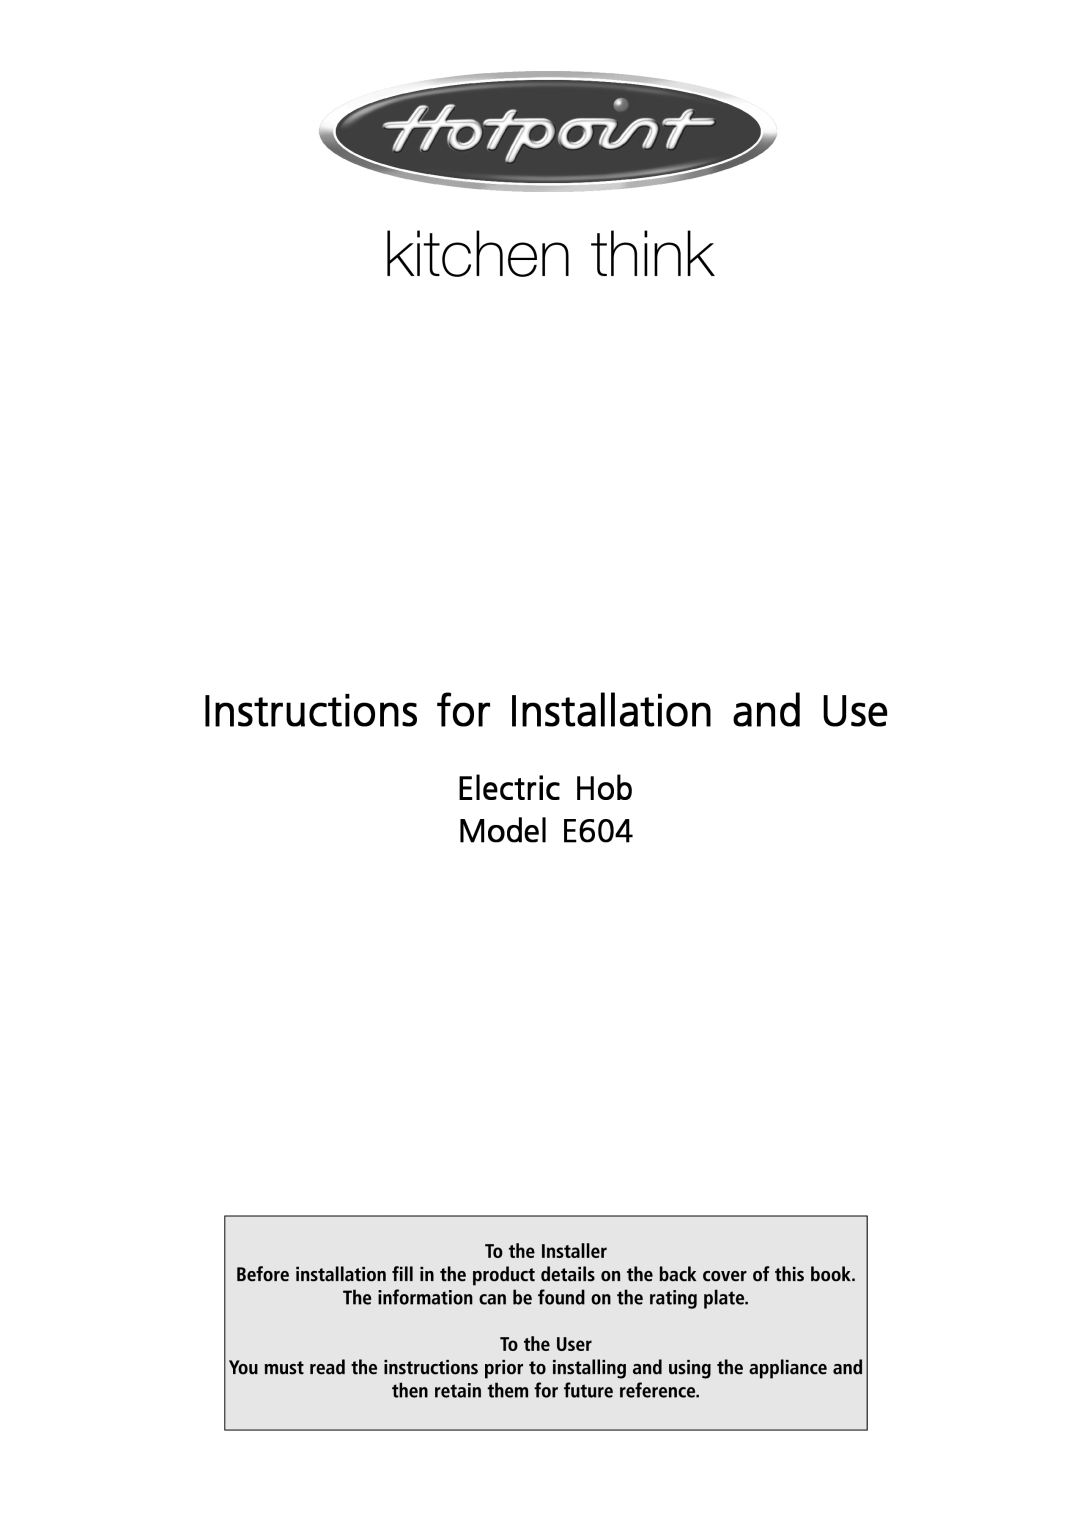 Hotpoint manual Instructions for Installation and Use, Electric Hob Model E604 